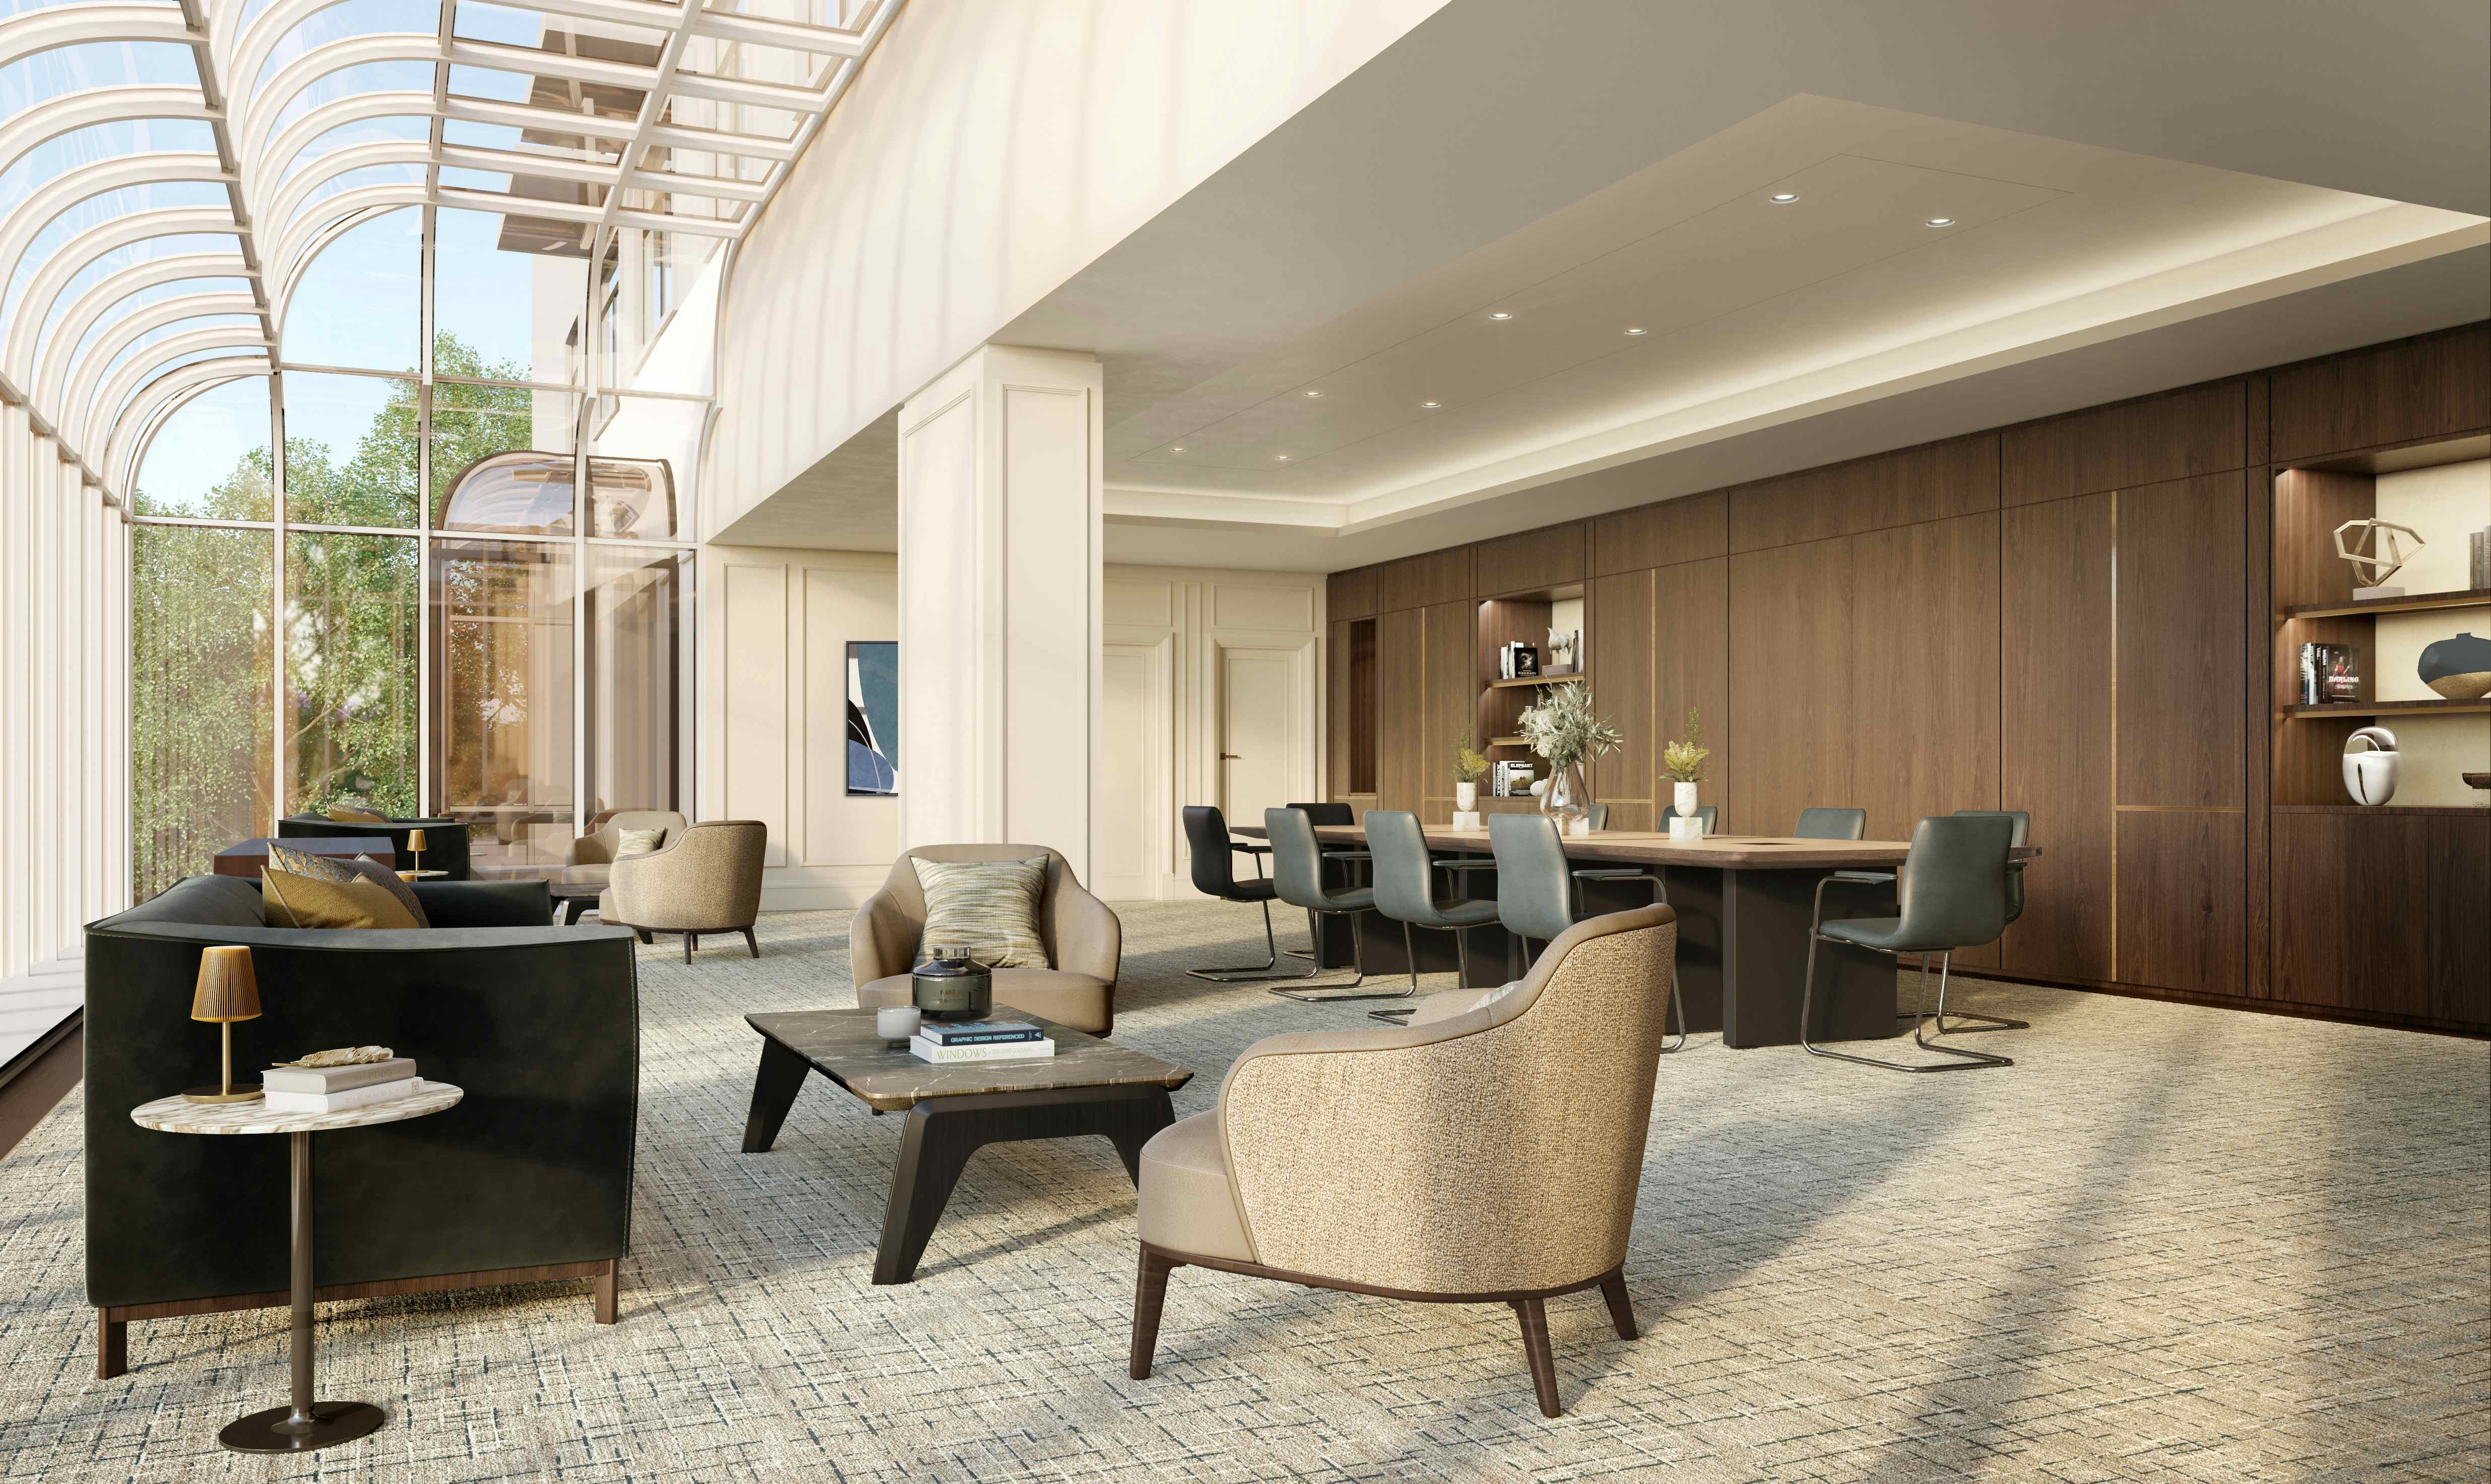 The Birch Room, The Carlton Tower Jumeirah - Opens 1st June 2021